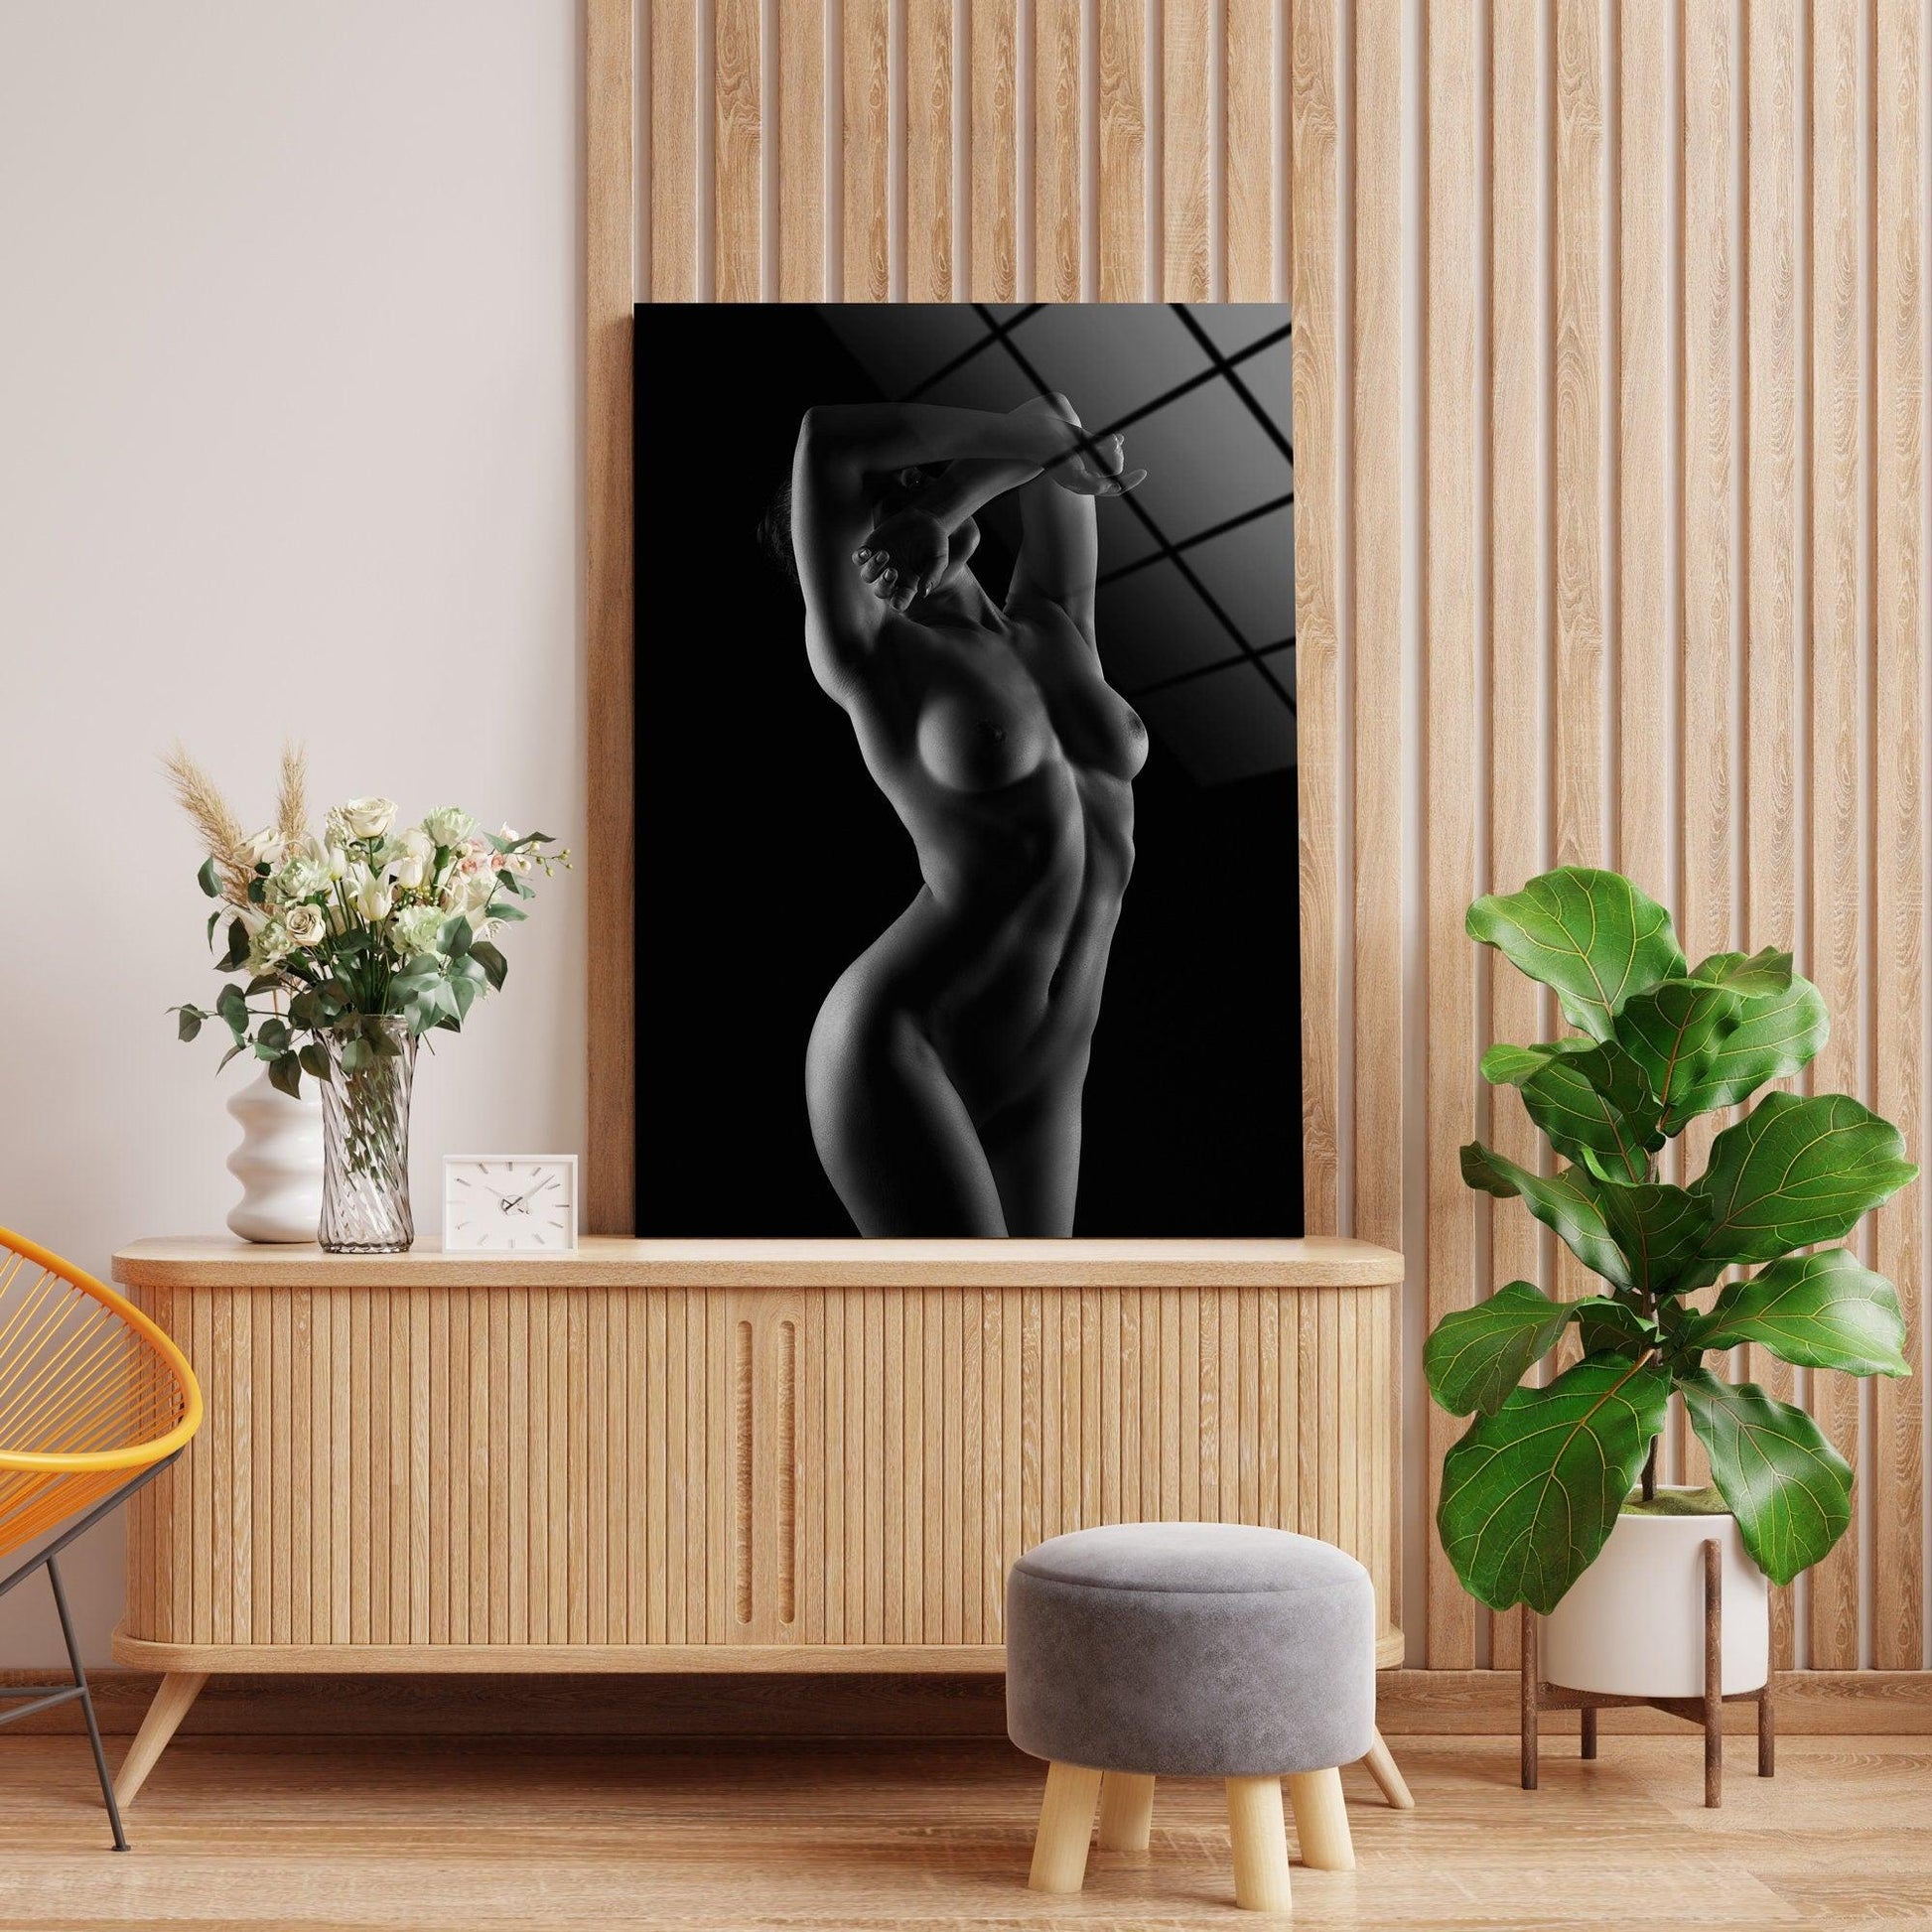 Woman Sex Painting| Sexy Bodies glass wall art, Sexy Art, Sex Wall Art, Home Décor, Erotic Art Sexy Nude Posters, nude lady art, nude girl